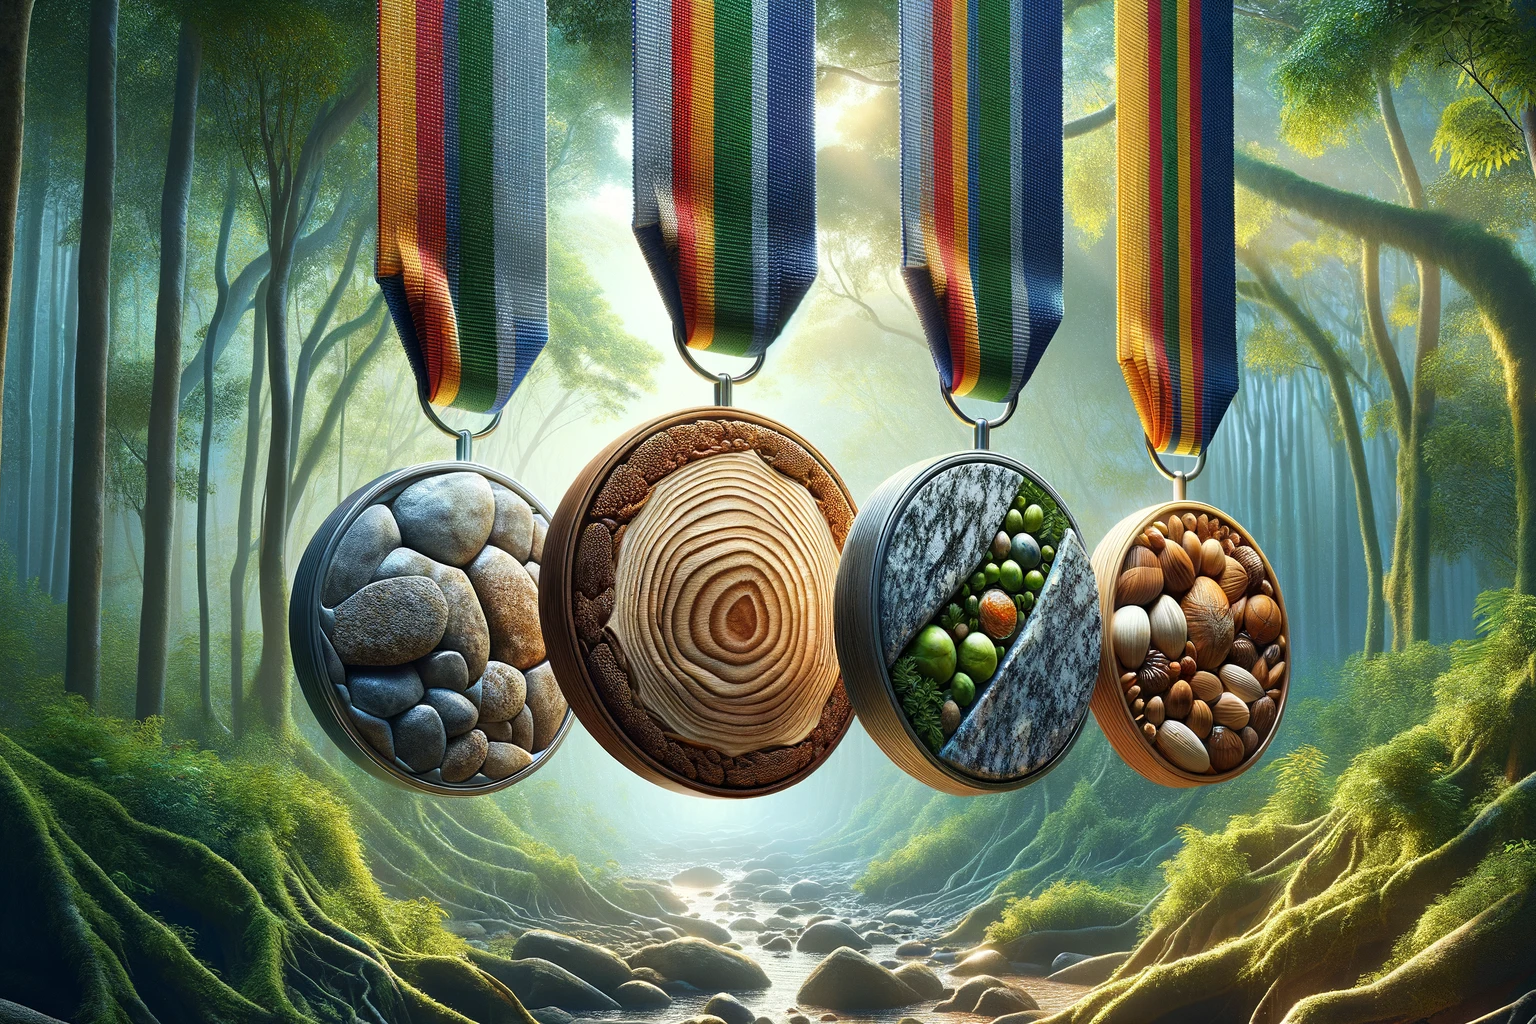 Three medals made of sustainable materials: a wooden medal, a stone medal, and a bird seed medal.